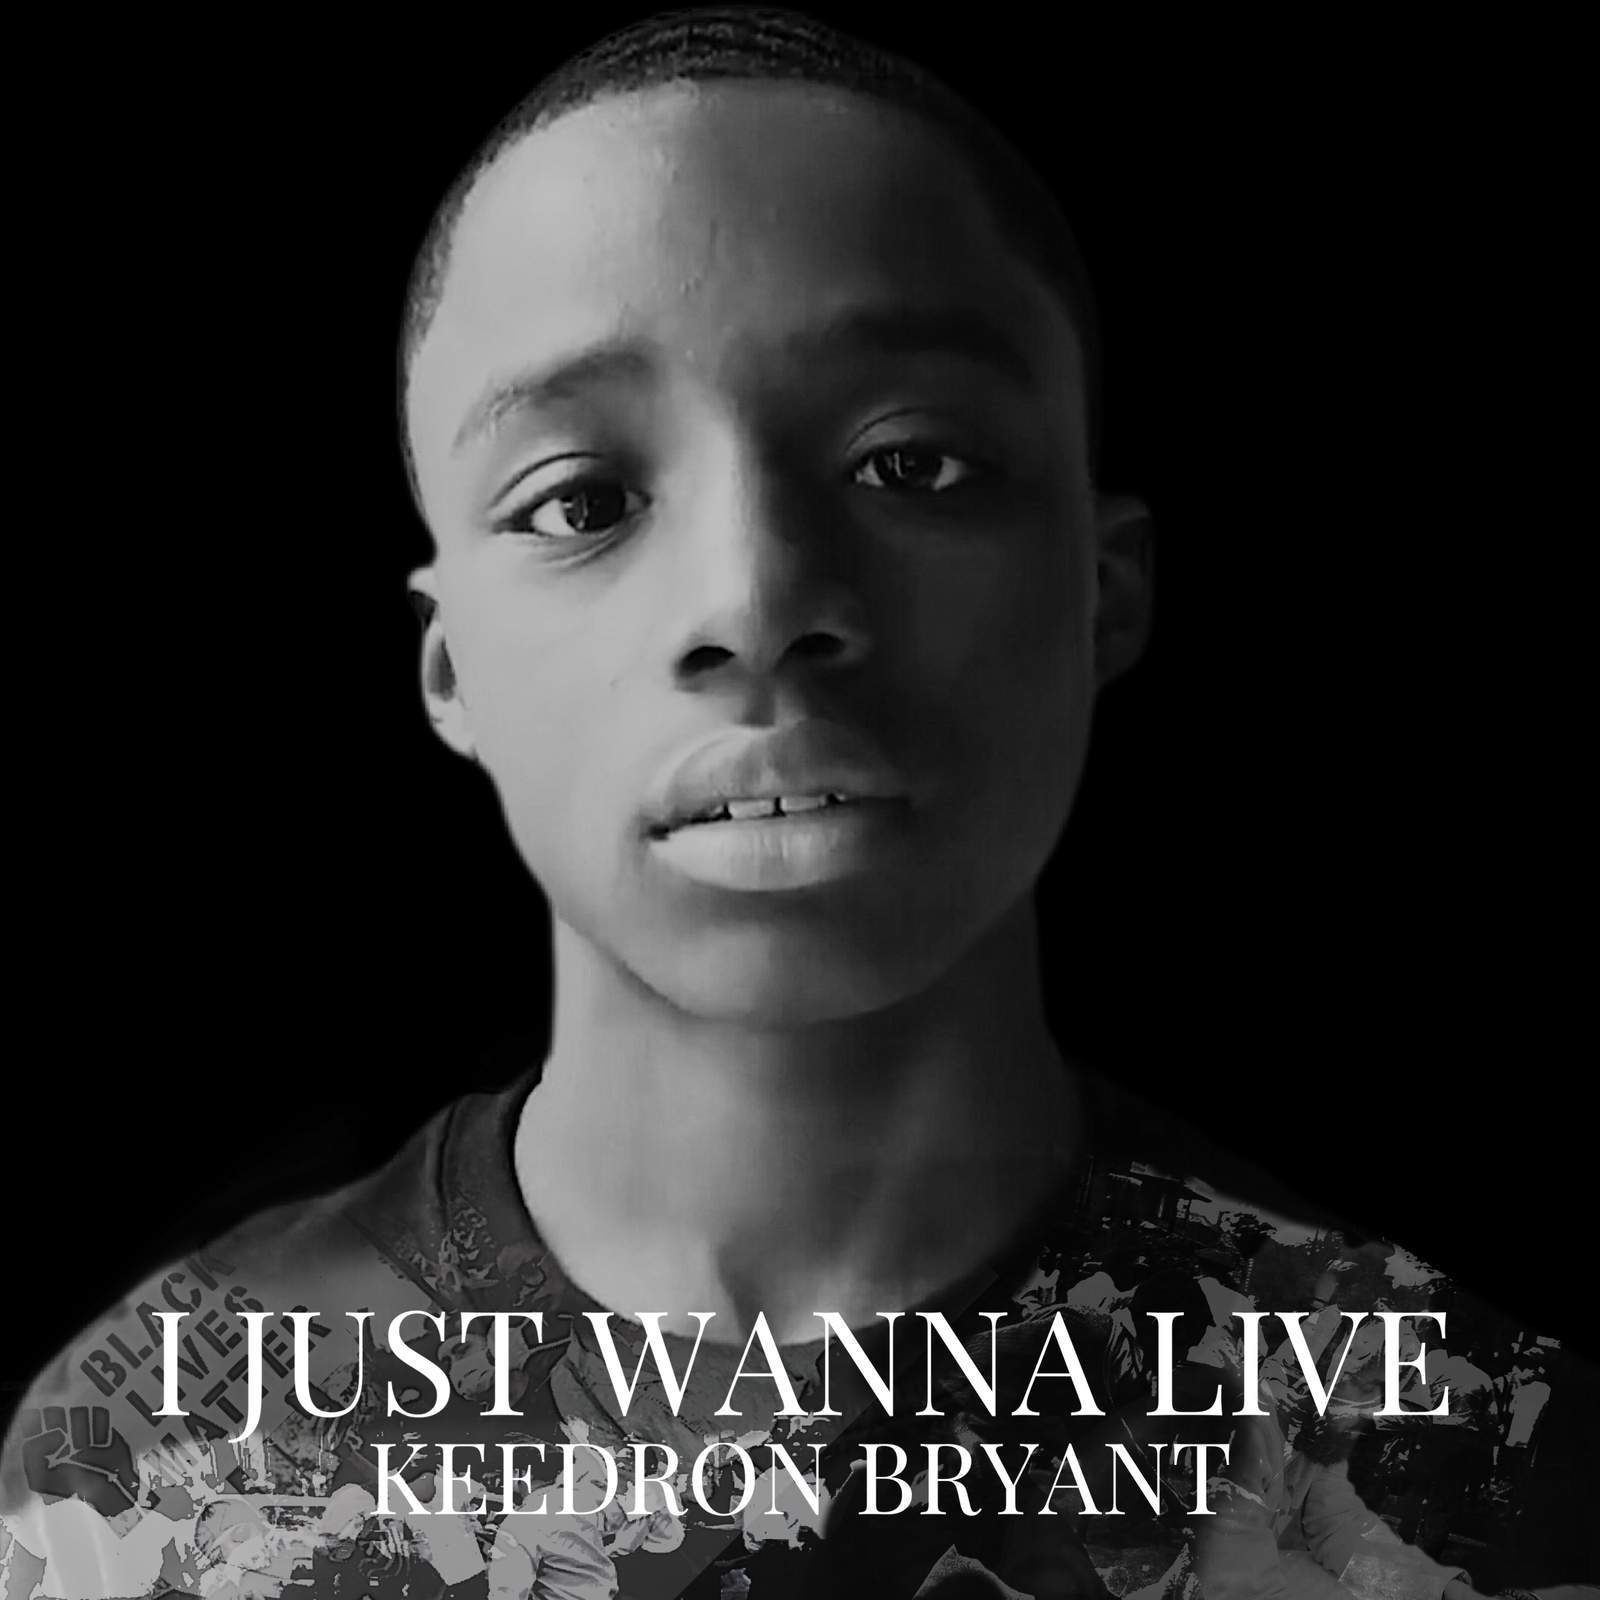 AP’s song of the year: Keedron Bryant’s ‘I Just Wanna Live’